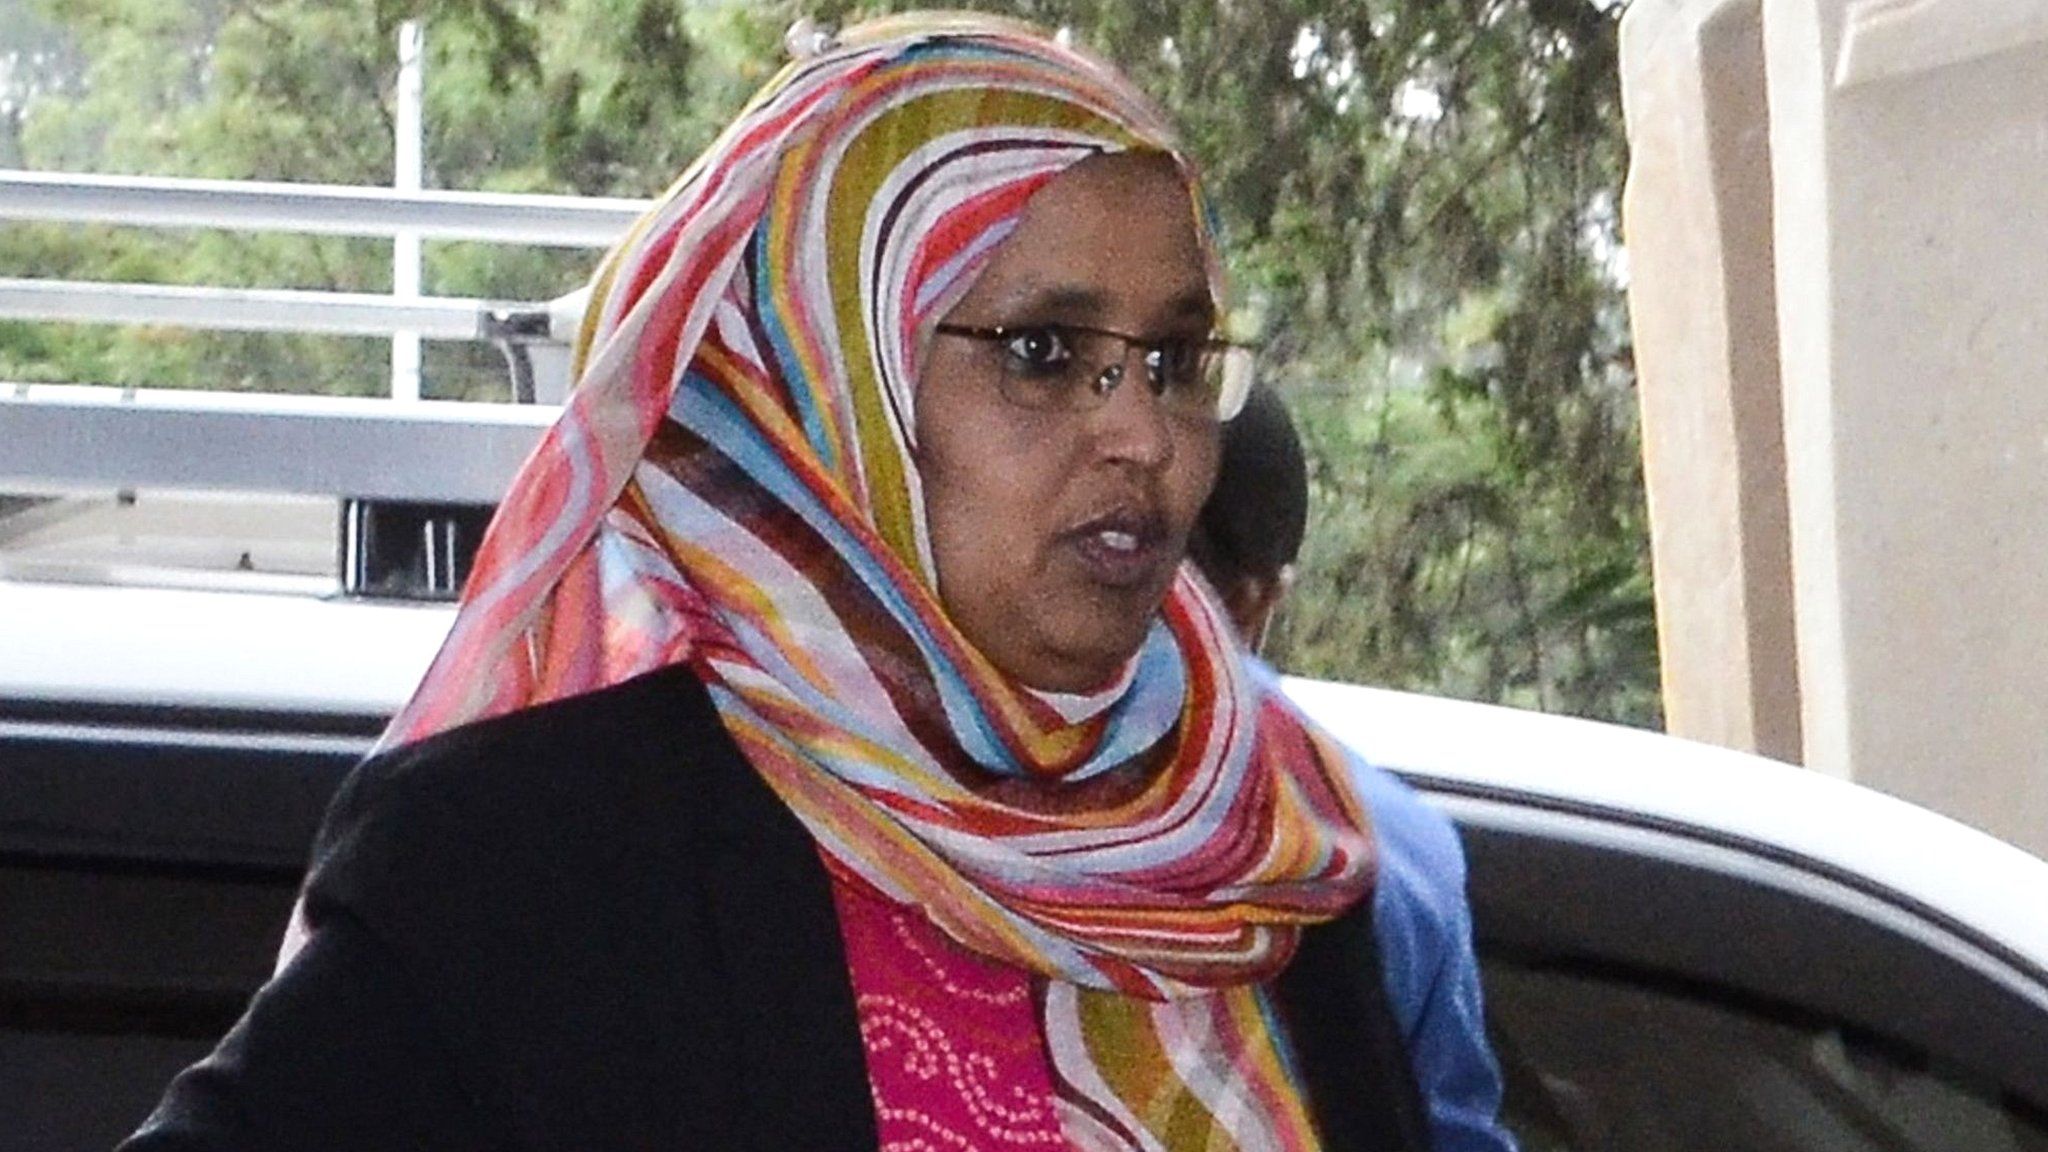 Aisha Mohammed, Ethiopia's new defence minister, arrives in Addis Ababa on 16 October 2018